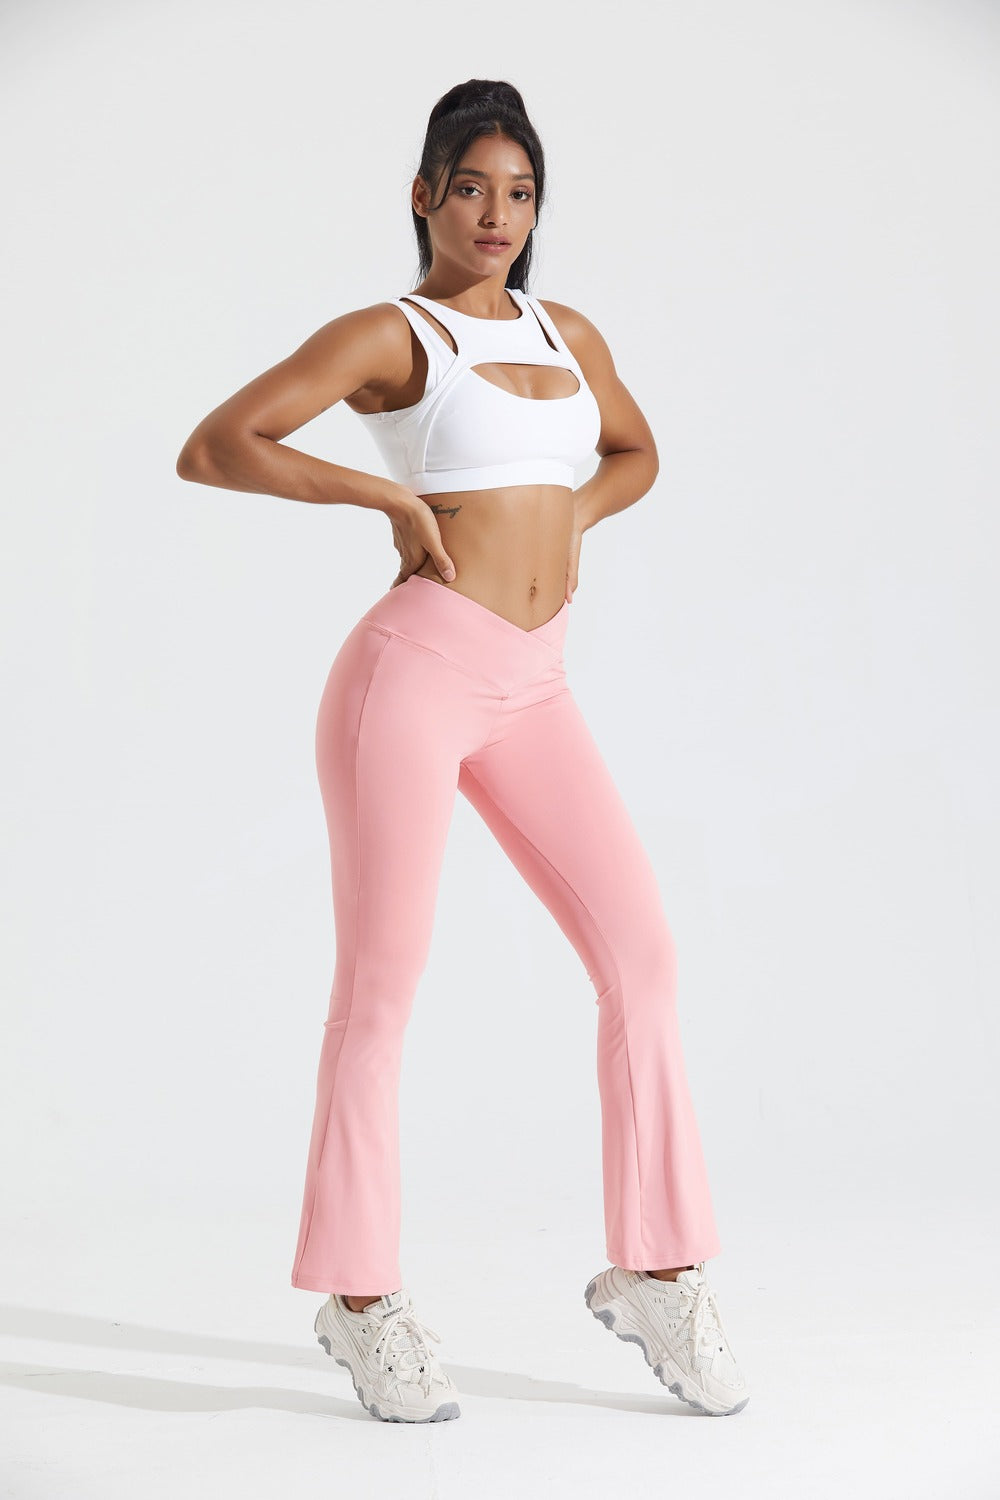  MOLERFO Flare Leggings, Crossover Yoga Pants with